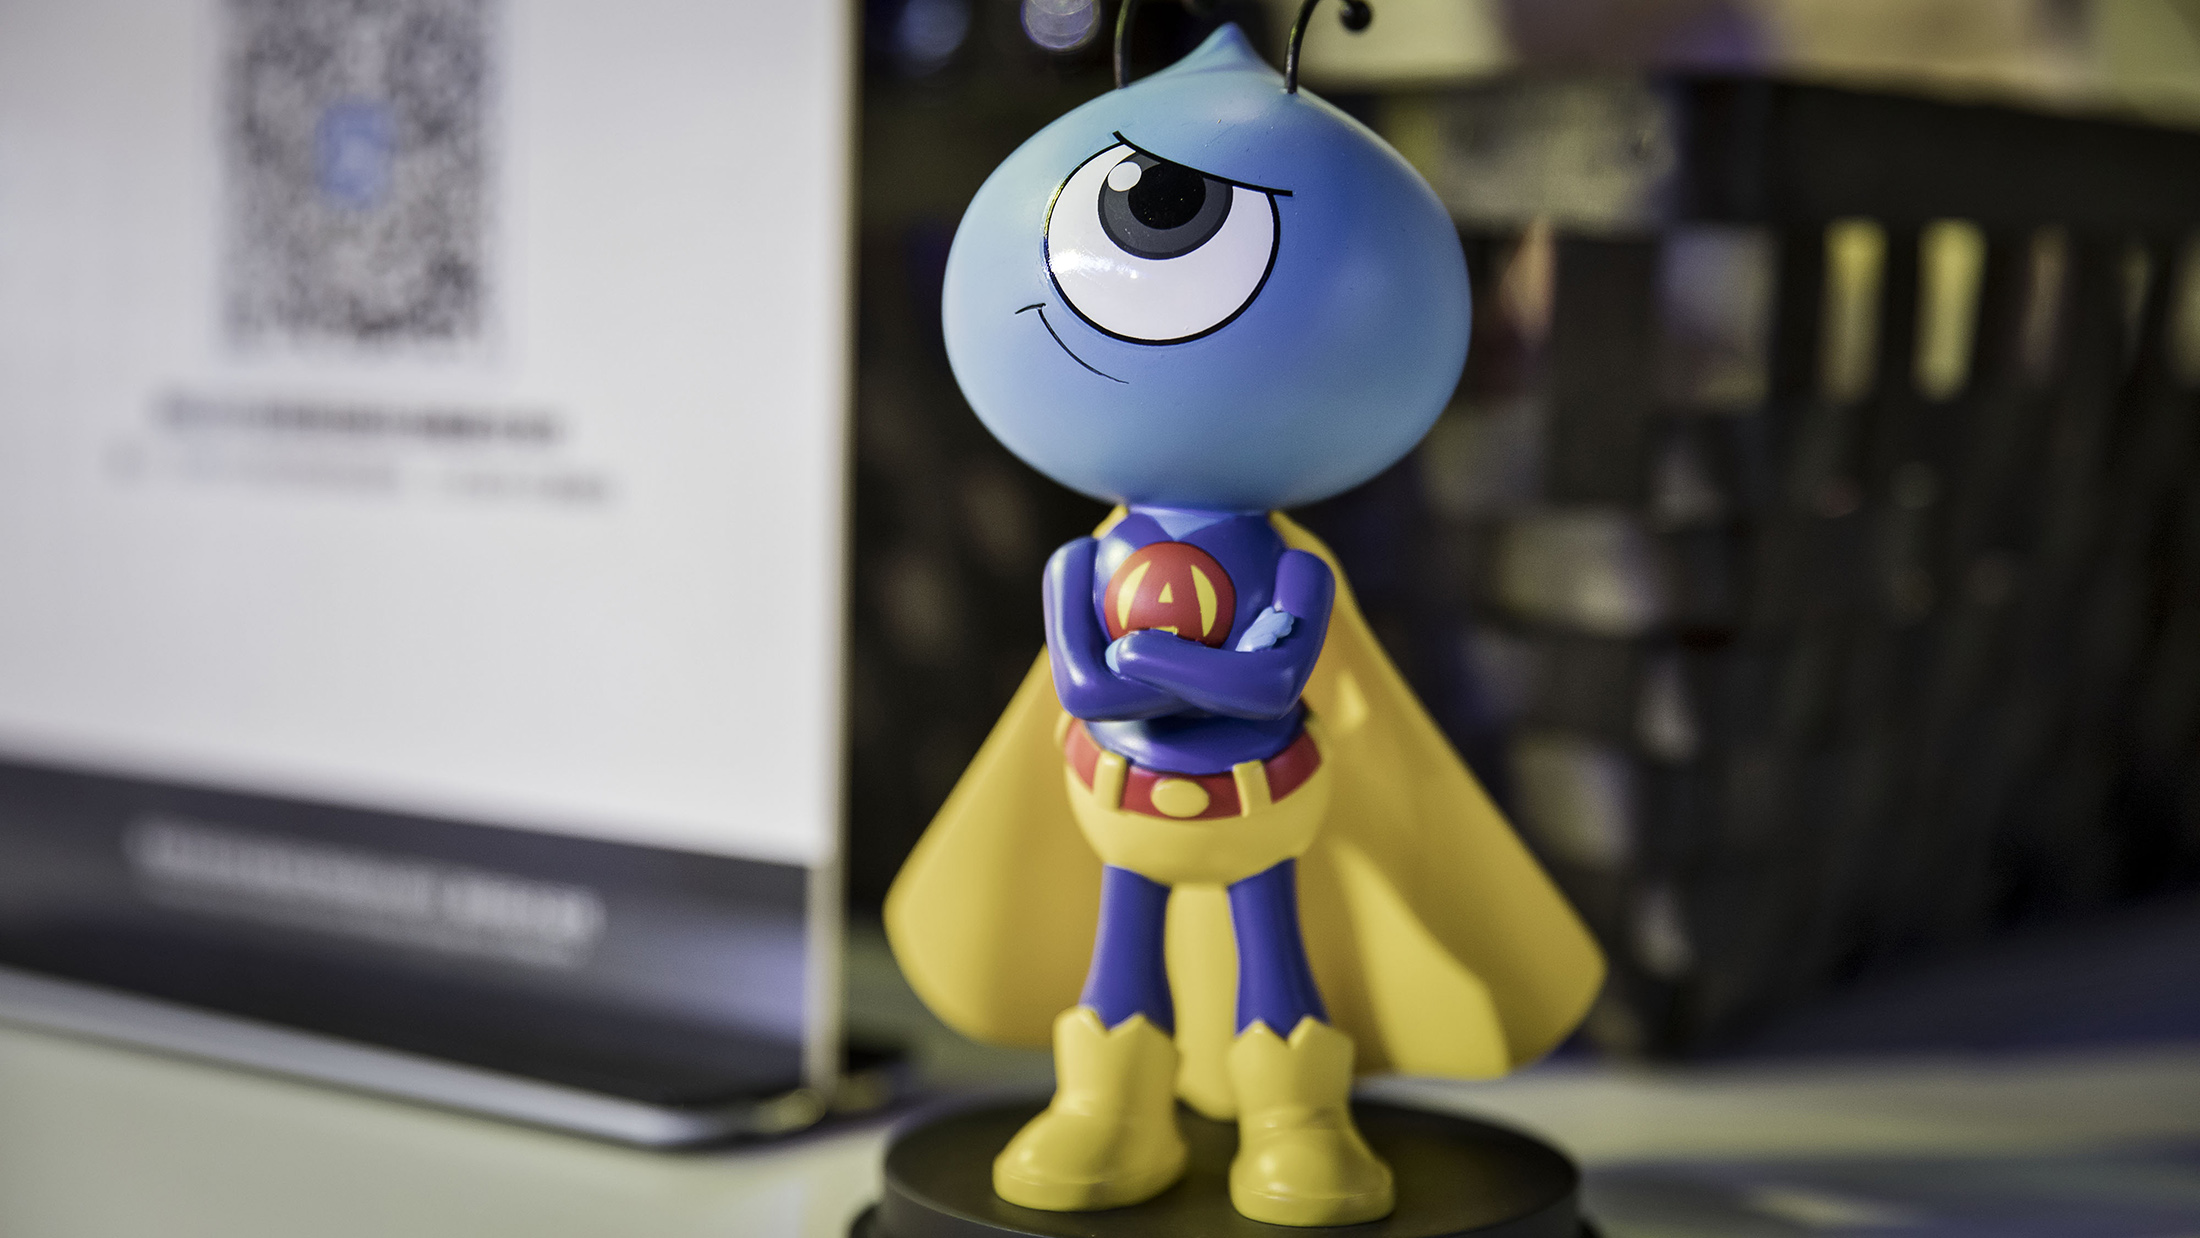 The mascot for Ant Financial Services Group stands on display at Alibaba Group Holding Ltd.'s annual November 11 Singles' Day online shopping event in Shenzhen, China, on Friday, Nov. 11, 2016. Alibaba broke its $14 billion Singles' Day sales record with room to spare, offering assurances about the strength of the Chinese consumer despite the nation's economic slowdown.
